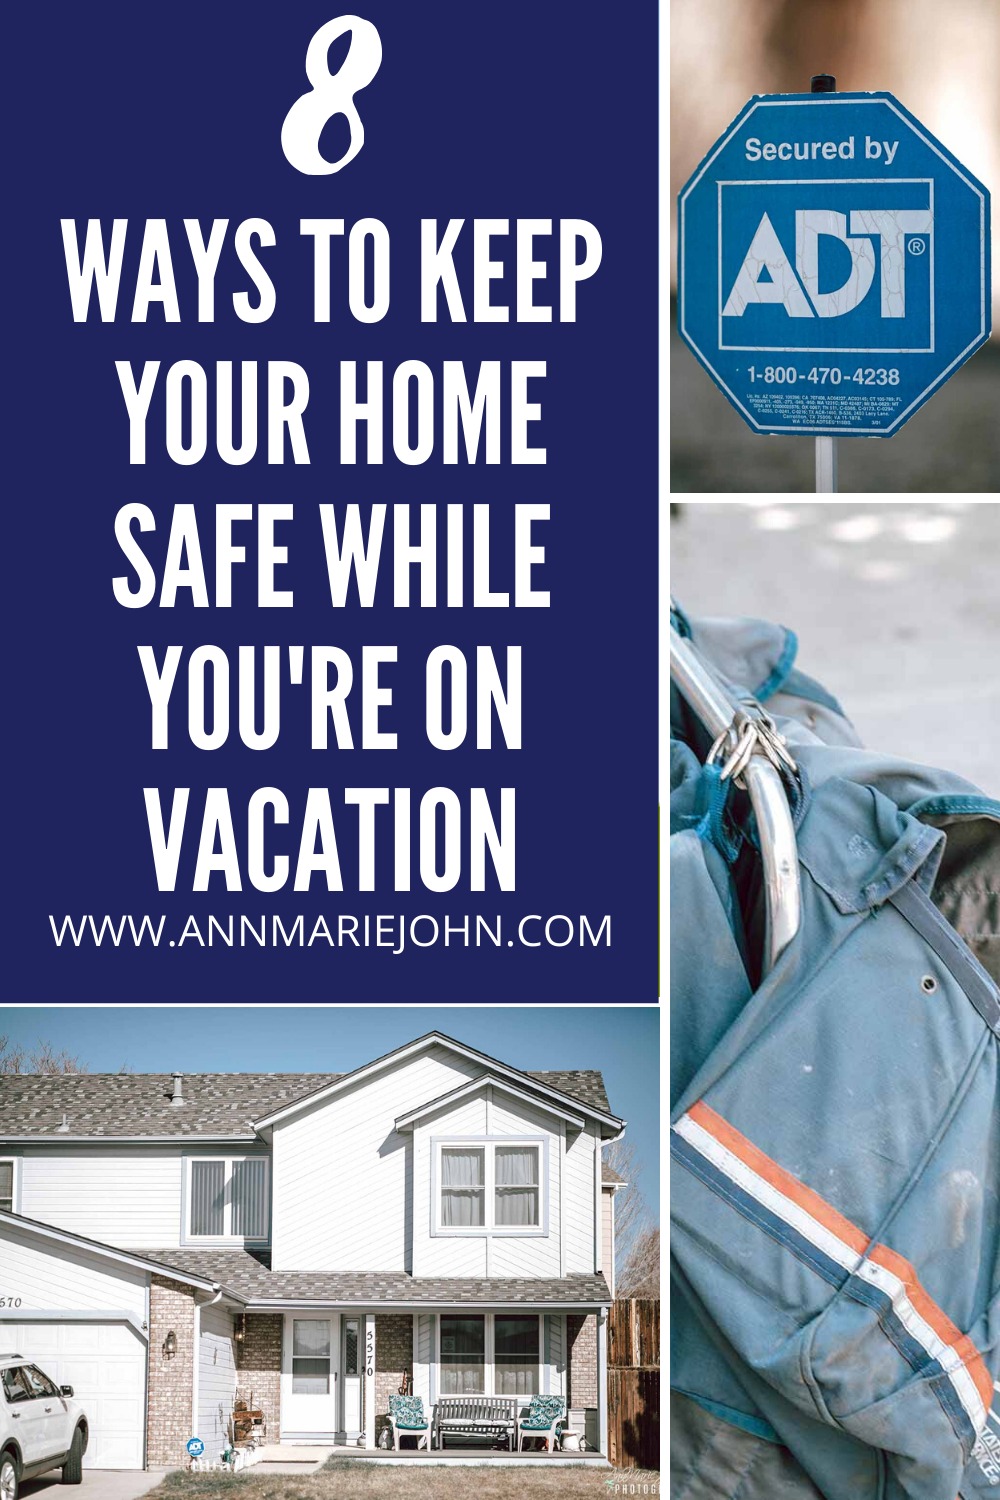 Keep Your Home Safe While On Vacation